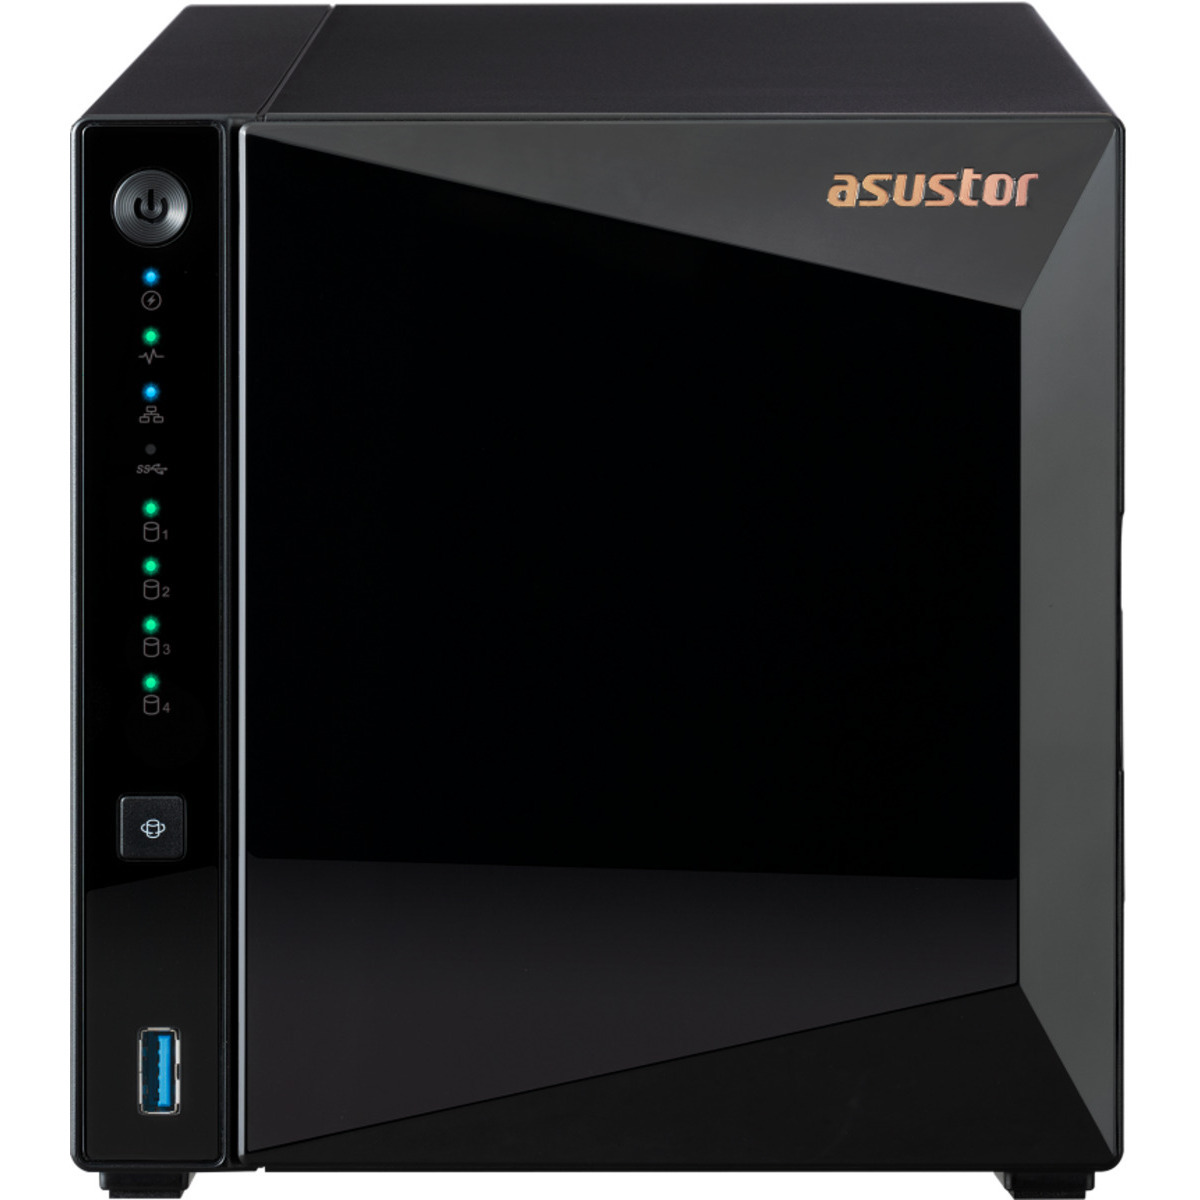 ASUSTOR DRIVESTOR 4 Pro AS3304T 40tb 4-Bay Desktop Personal / Basic Home / Small Office NAS - Network Attached Storage Device 4x10tb Seagate IronWolf Pro ST10000NT001 3.5 7200rpm SATA 6Gb/s HDD NAS Class Drives Installed - Burn-In Tested - ON SALE DRIVESTOR 4 Pro AS3304T